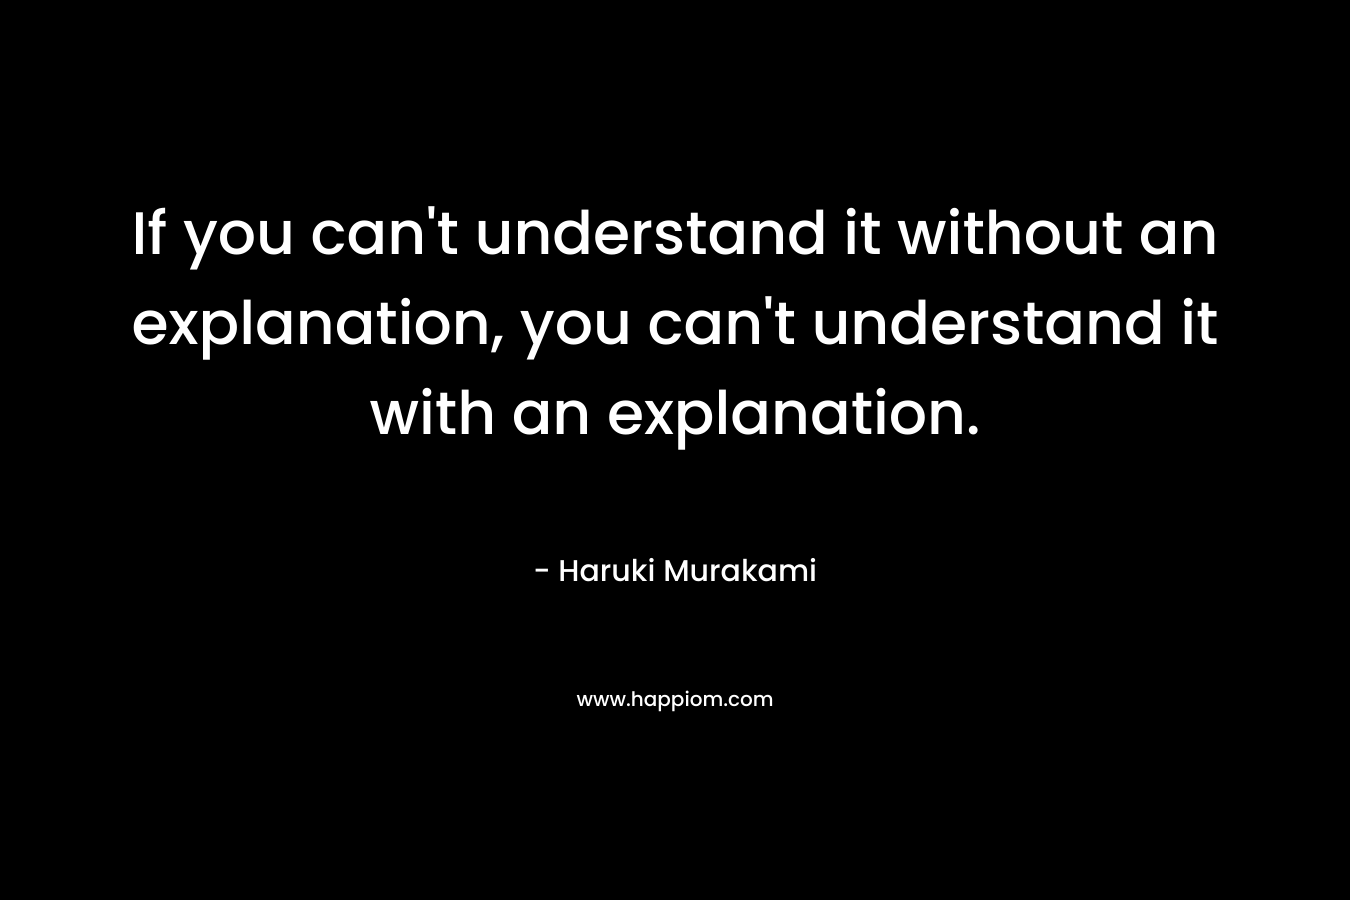 If you can't understand it without an explanation, you can't understand it with an explanation.